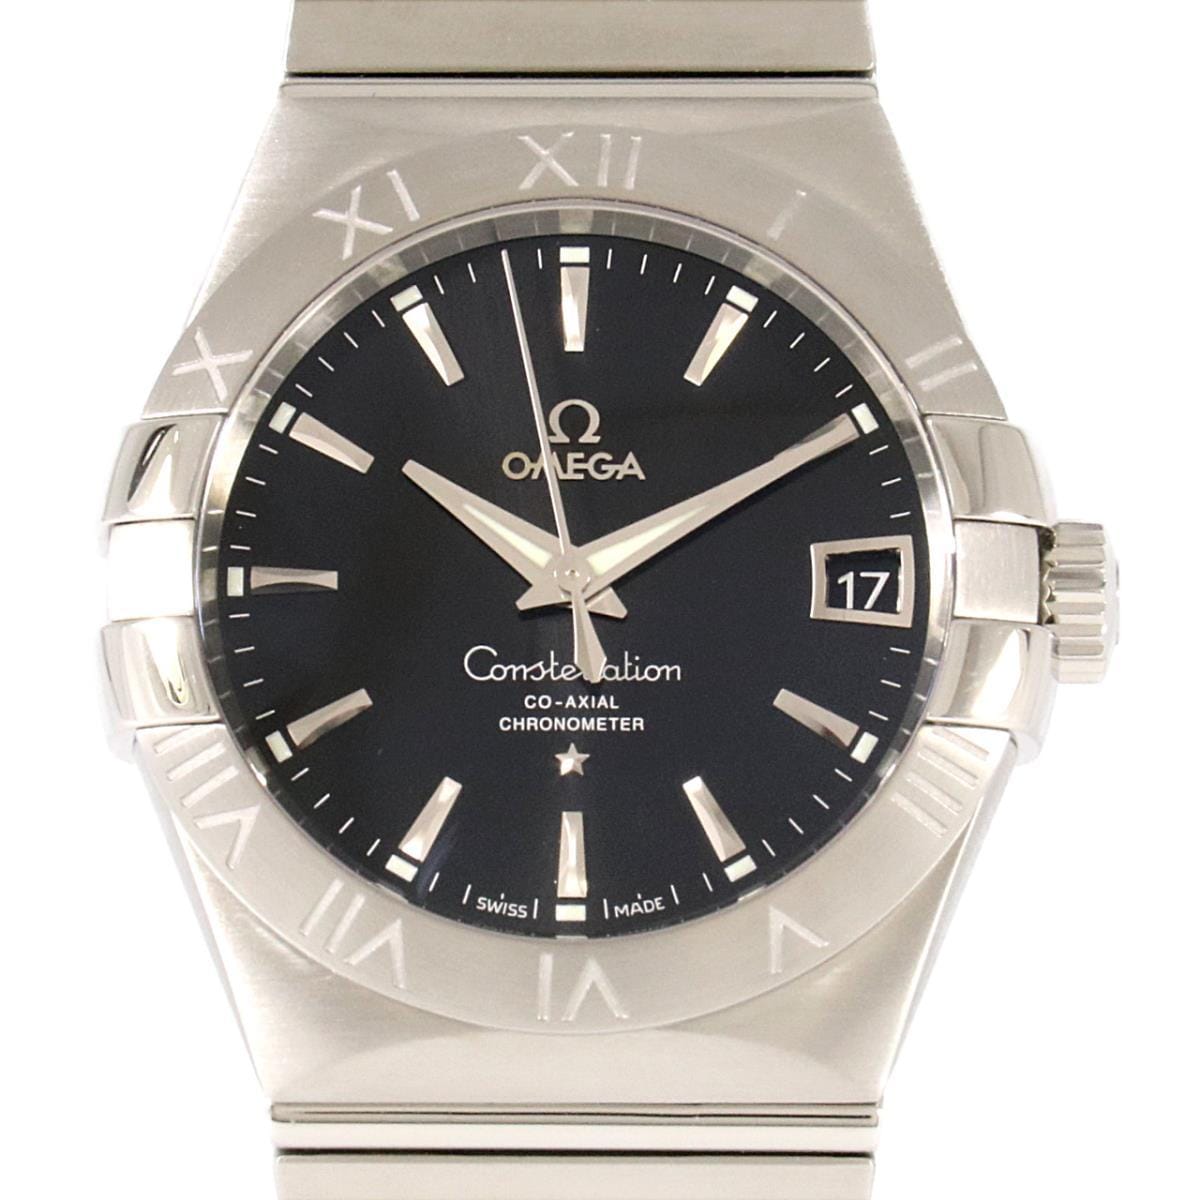 [BRAND NEW] Omega 123.10.38.21.01.001 Constellation Brushed Automatic